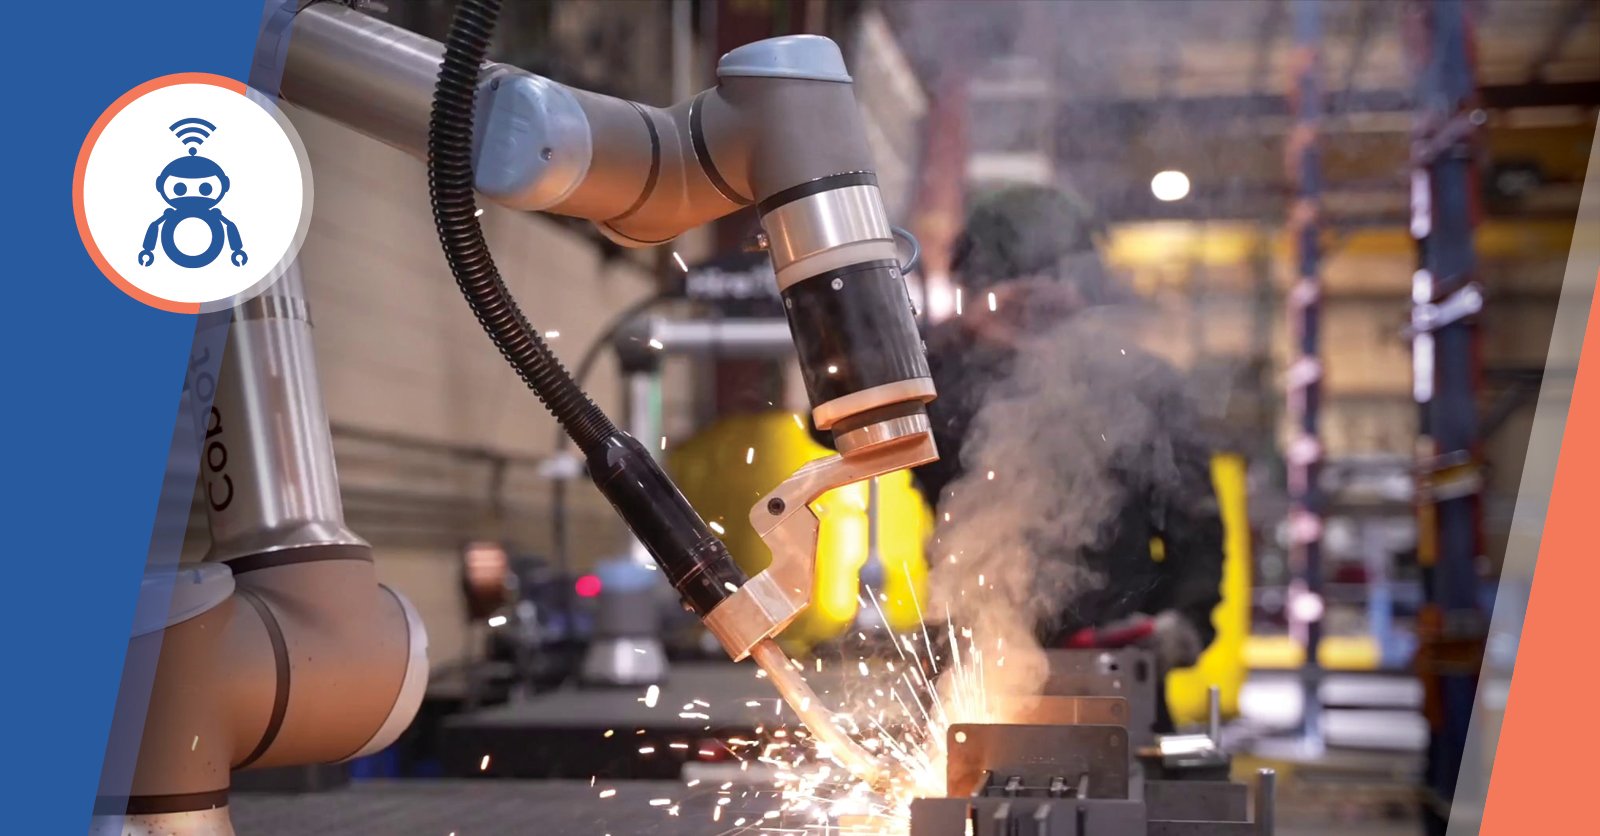 How Much Does a Robotic Welder Cost?